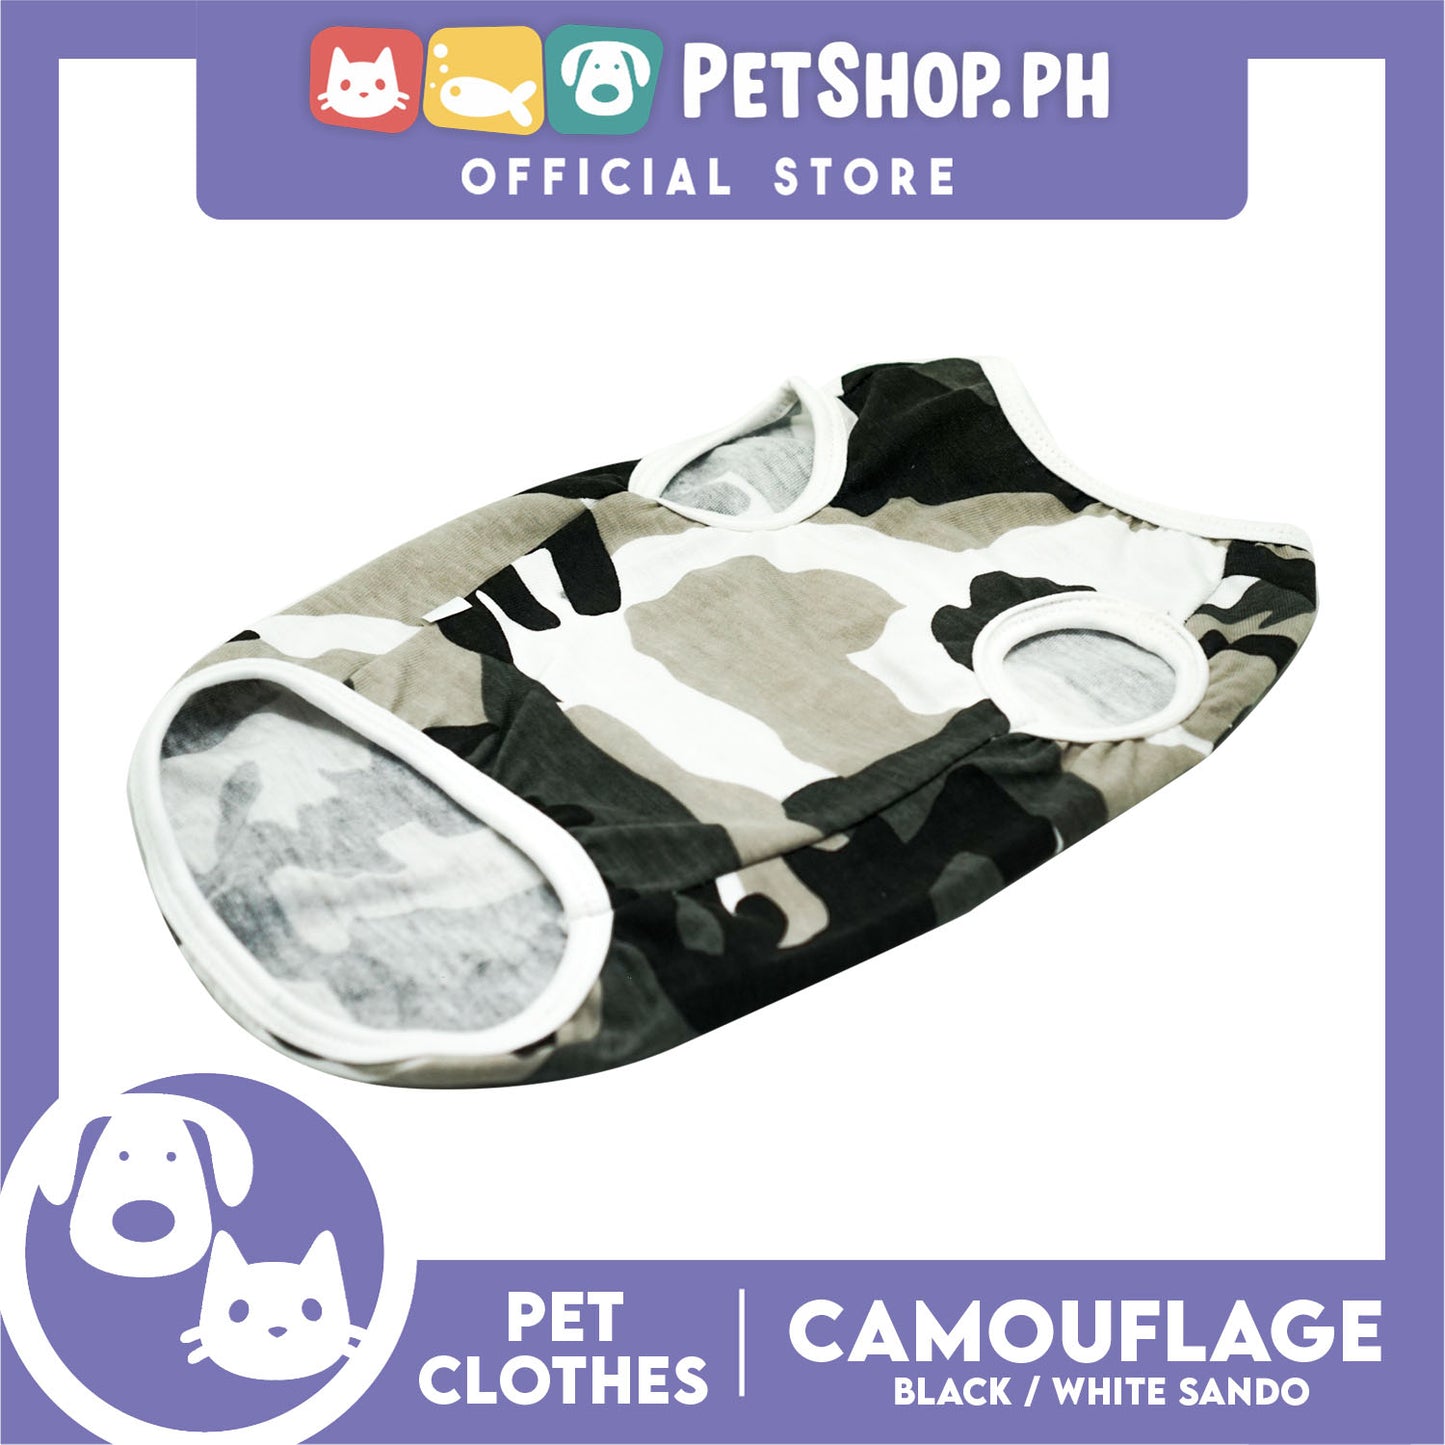 Pet Shirt Camouflage Black and White Sando (Medium) Perfect Shirt for Male Dogs and Cats